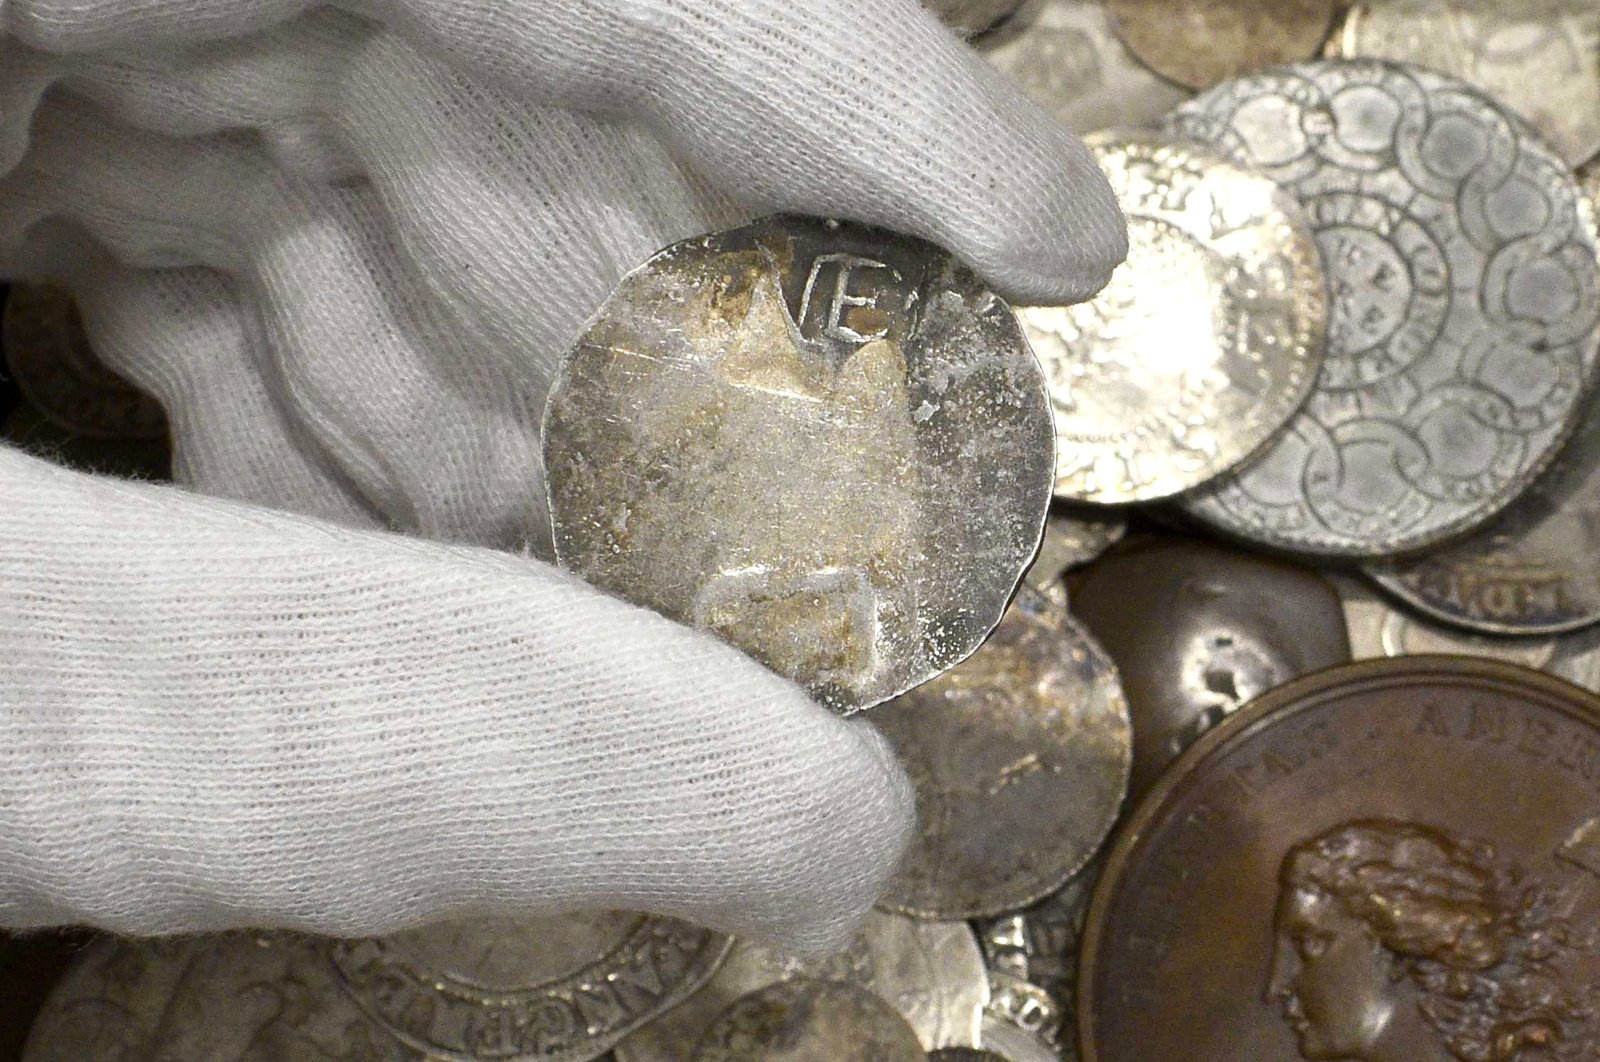 A rare 17th century 1 shilling coin is displayed above a metal box containing other coins, at the auction house, in London. Sept. 9, 2021. (AP Photo)